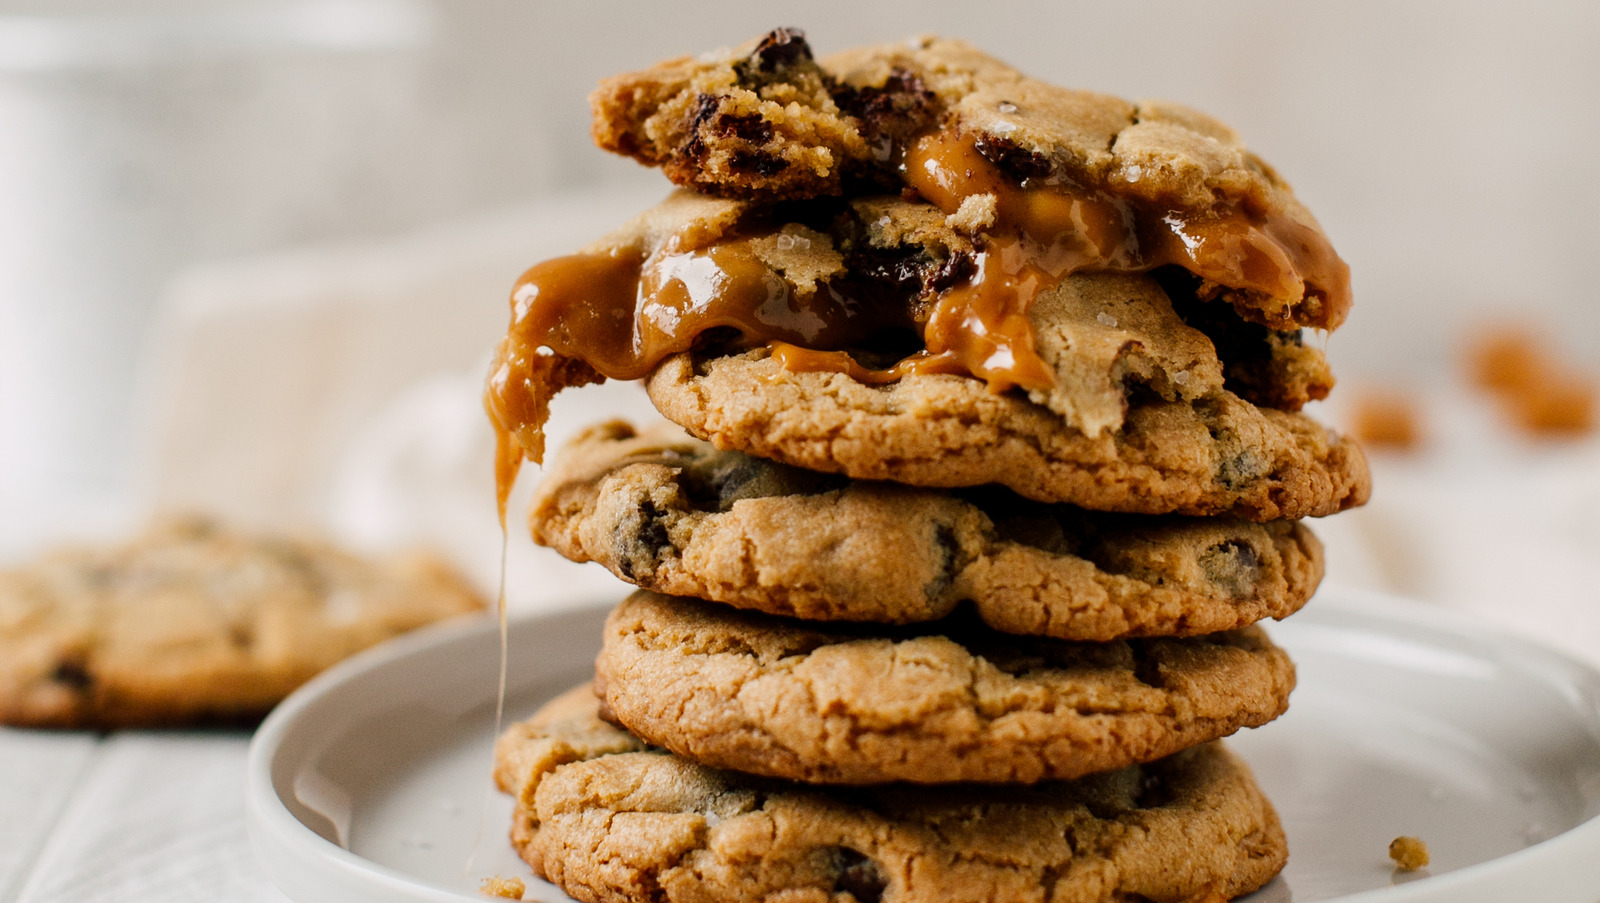 https://www.tastingtable.com/img/gallery/25-best-ingredients-to-upgrade-your-chocolate-chip-cookies/l-intro-1666732809.jpg